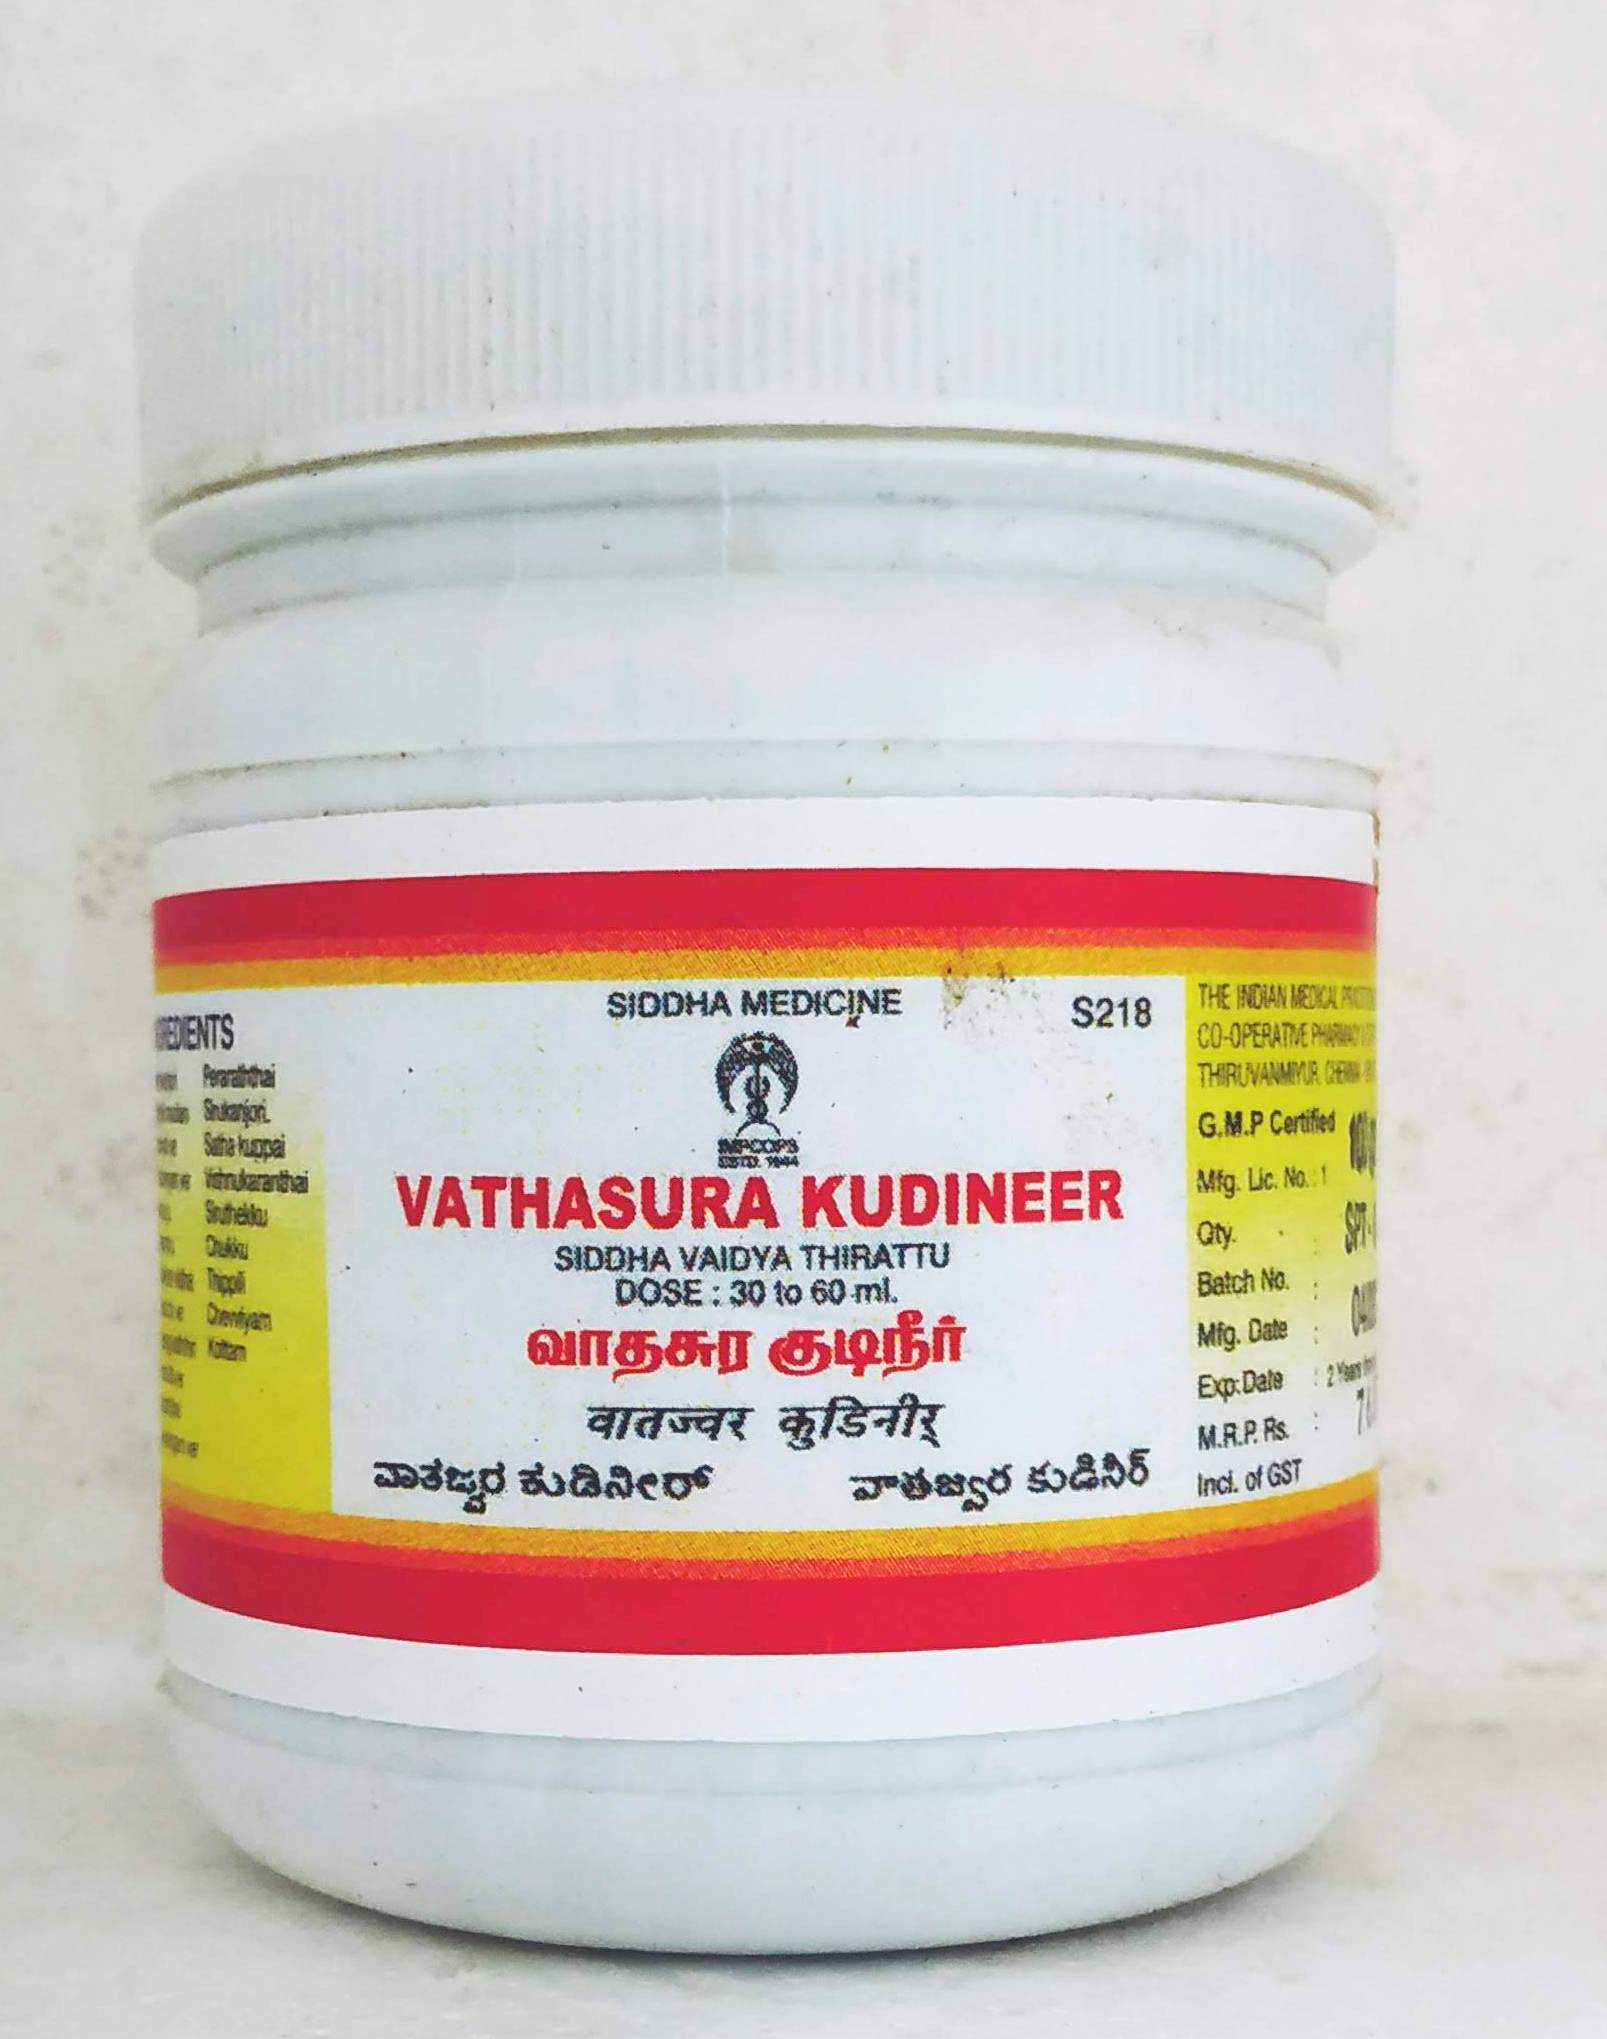 Shop Impcops Vathasura Kudineer 100gm at price 76.00 from Impcops Online - Ayush Care